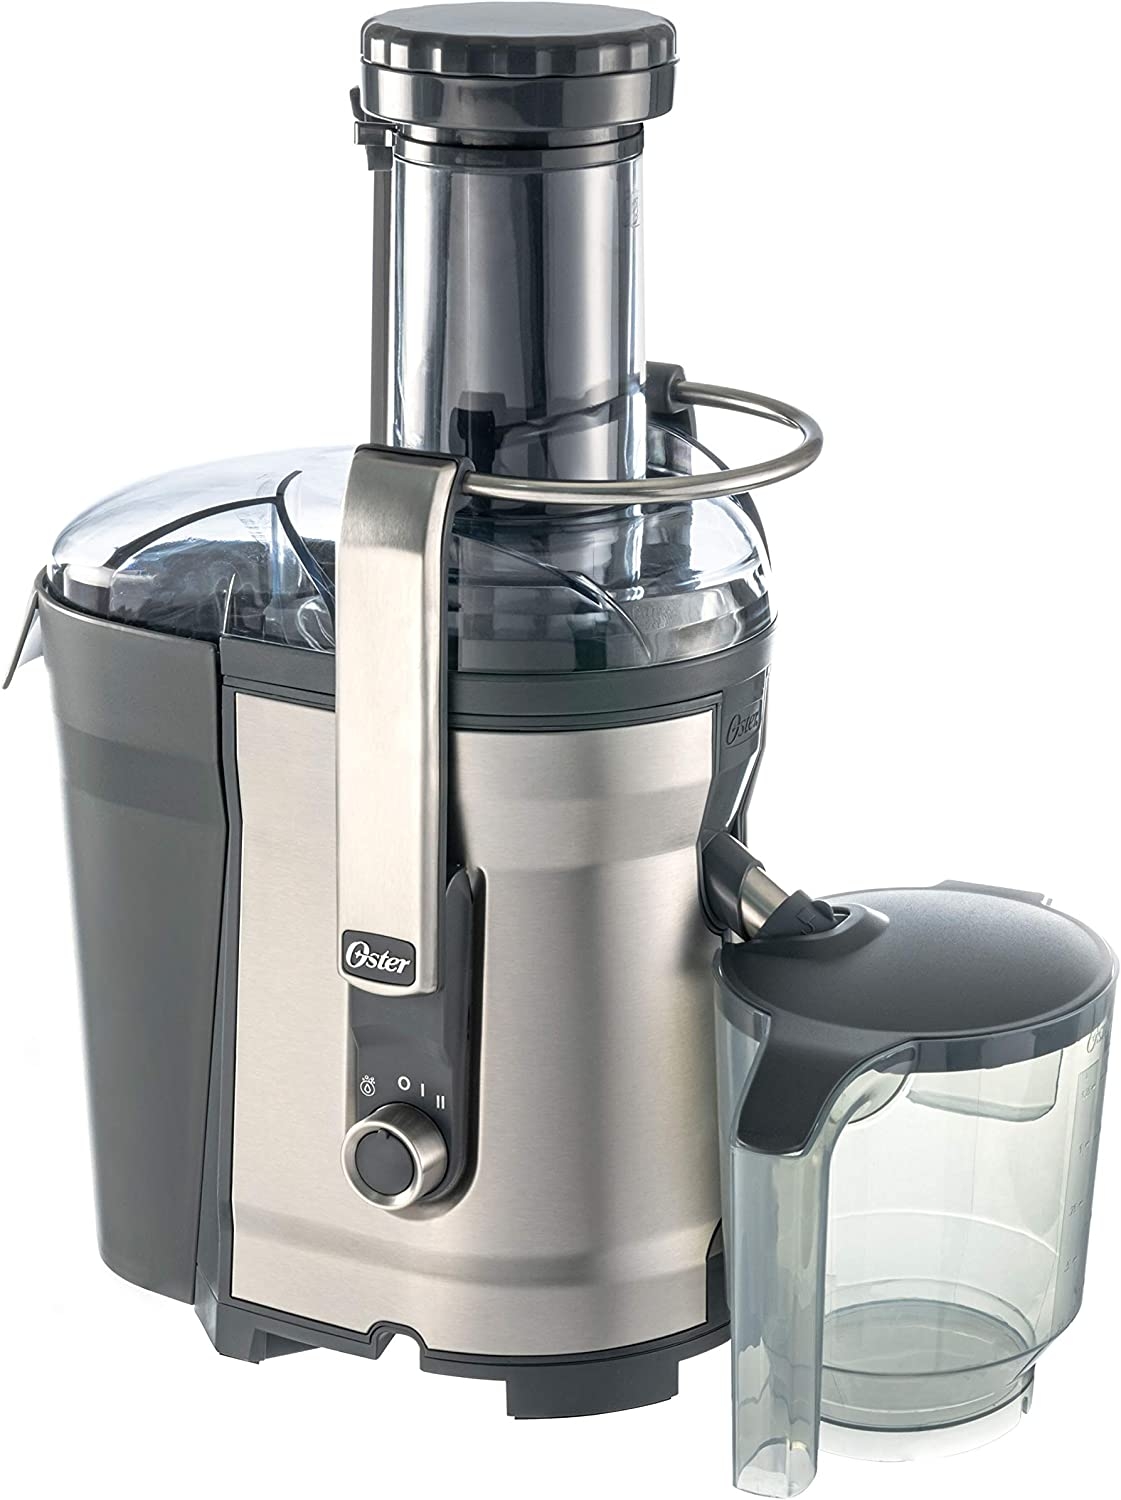 Oster Easy-to-Clean Professional Juicer, Stainless Steel Juice Extractor, Auto-Clean Technology, XL Capacity, Gray Import To